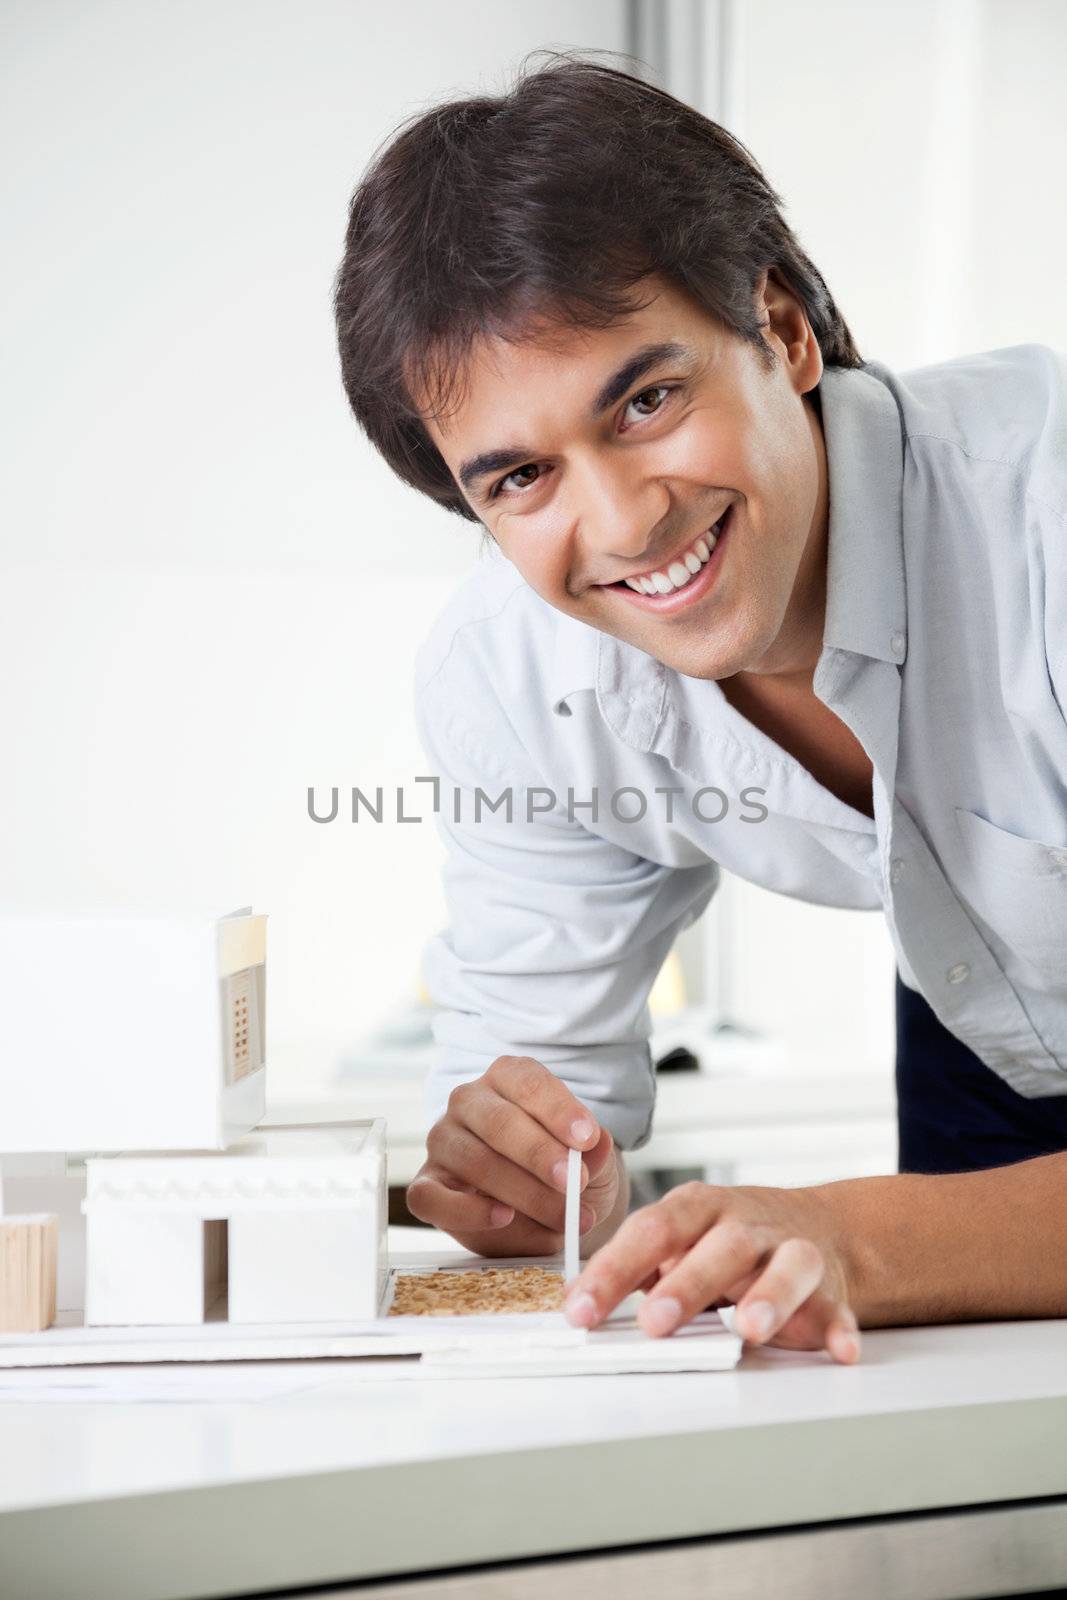 Portrait of young male architect smiling while creating a model house